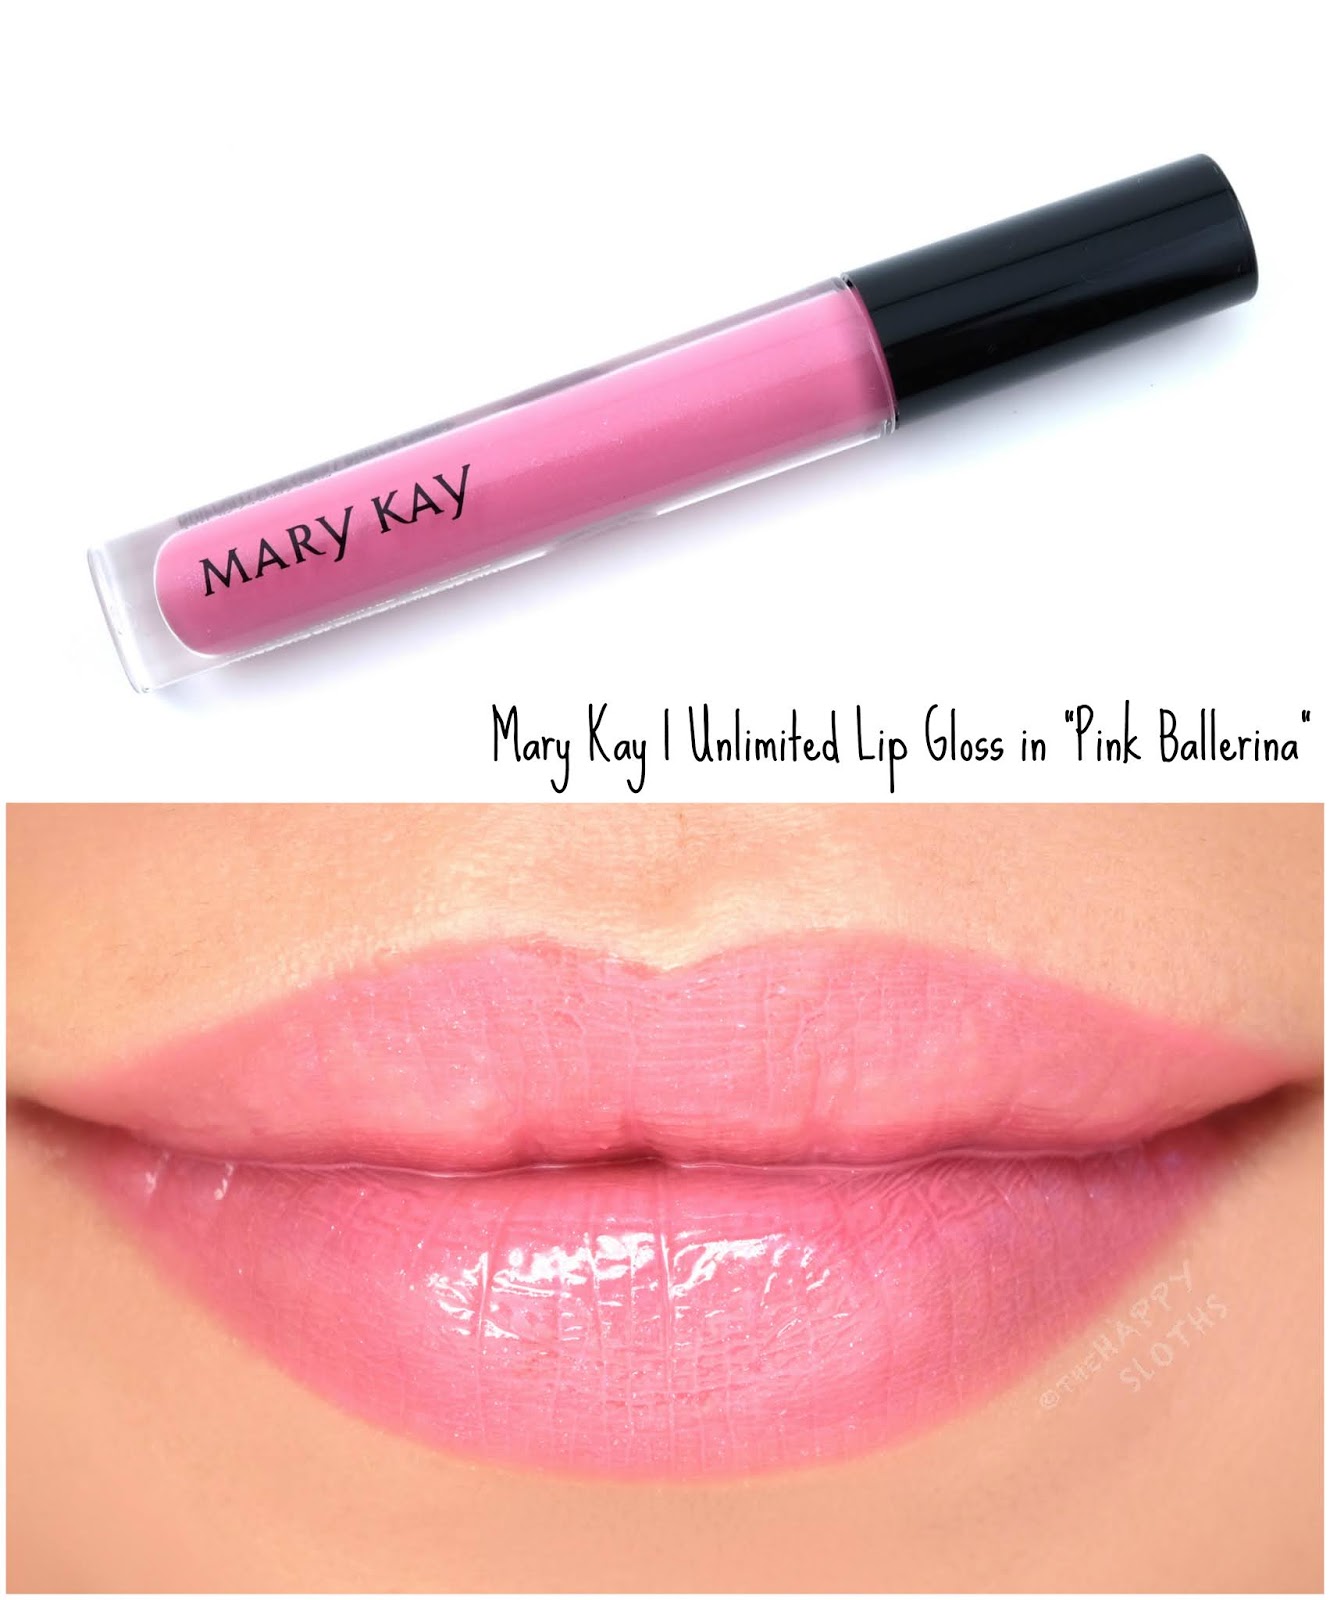 Mary Kay | Unlimited Lip Gloss in "Pink Ballerina": Review and Swatches